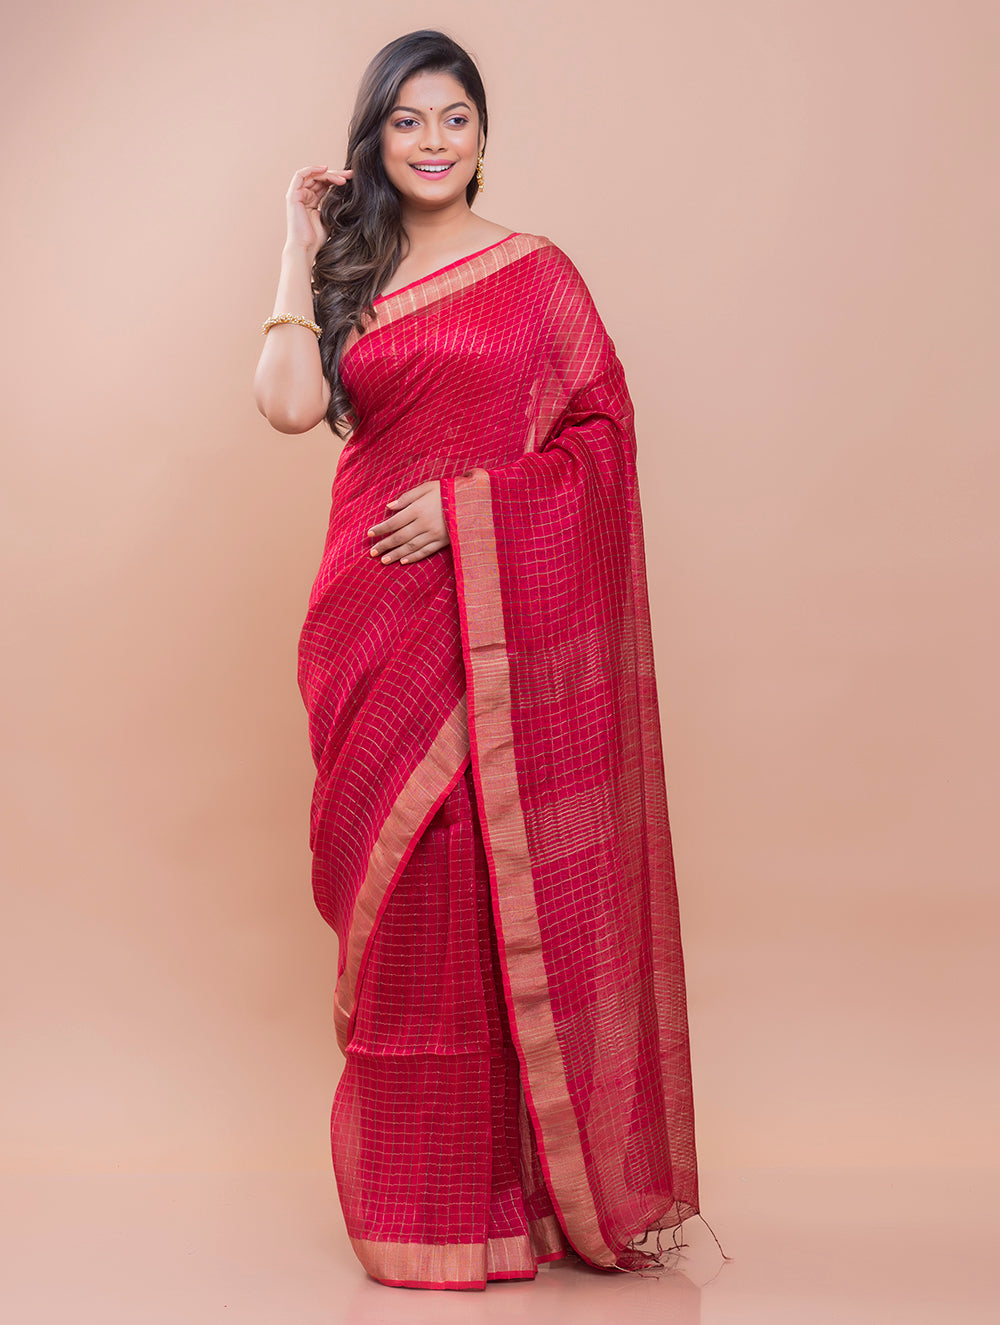 Load image into Gallery viewer, Soft Bengal Handwoven Linen Saree - Red